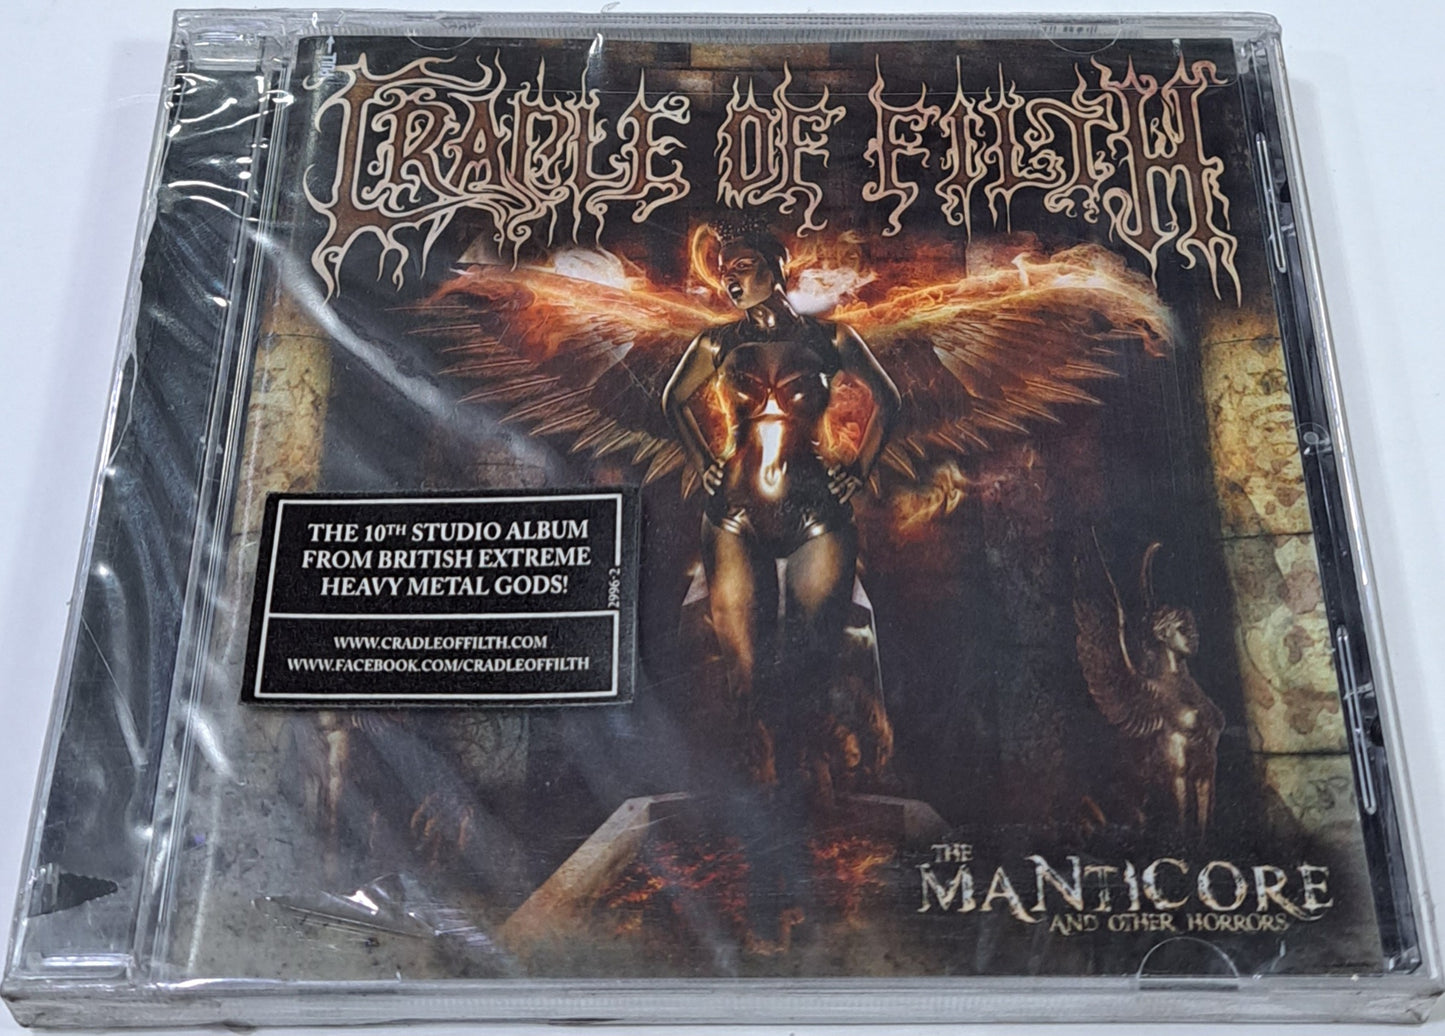 CRADLE OF FILTH - THE MANTICORE AND OTHER HORRORS CD